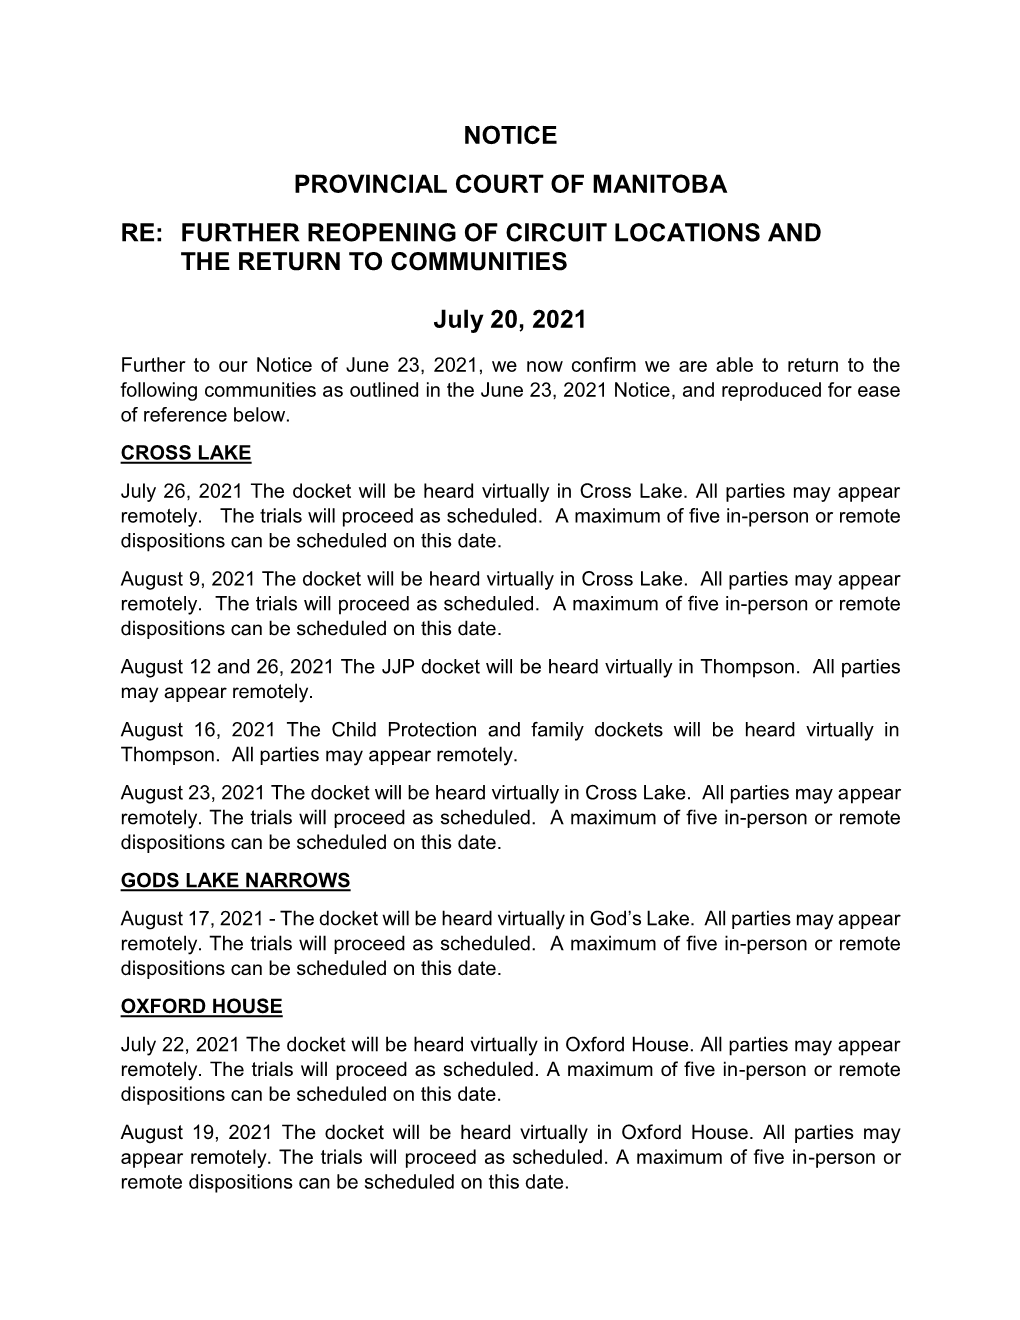 Notice Provincial Court of Manitoba Re: Further Reopening of Circuit Locations and the Return to Communities